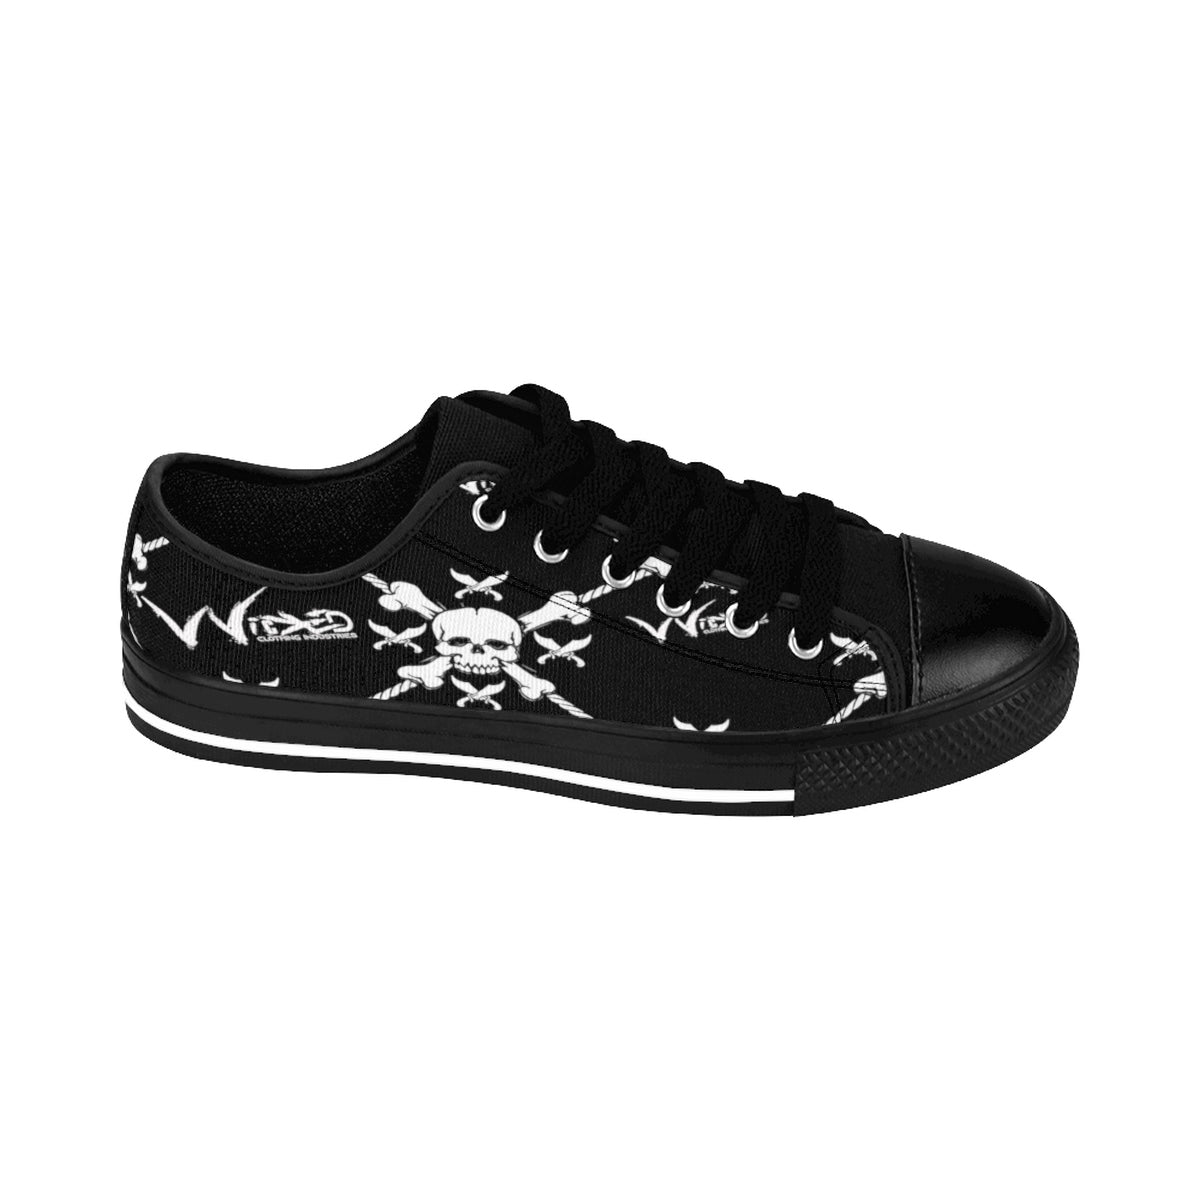 Women's Sneakers Wicked Pirate